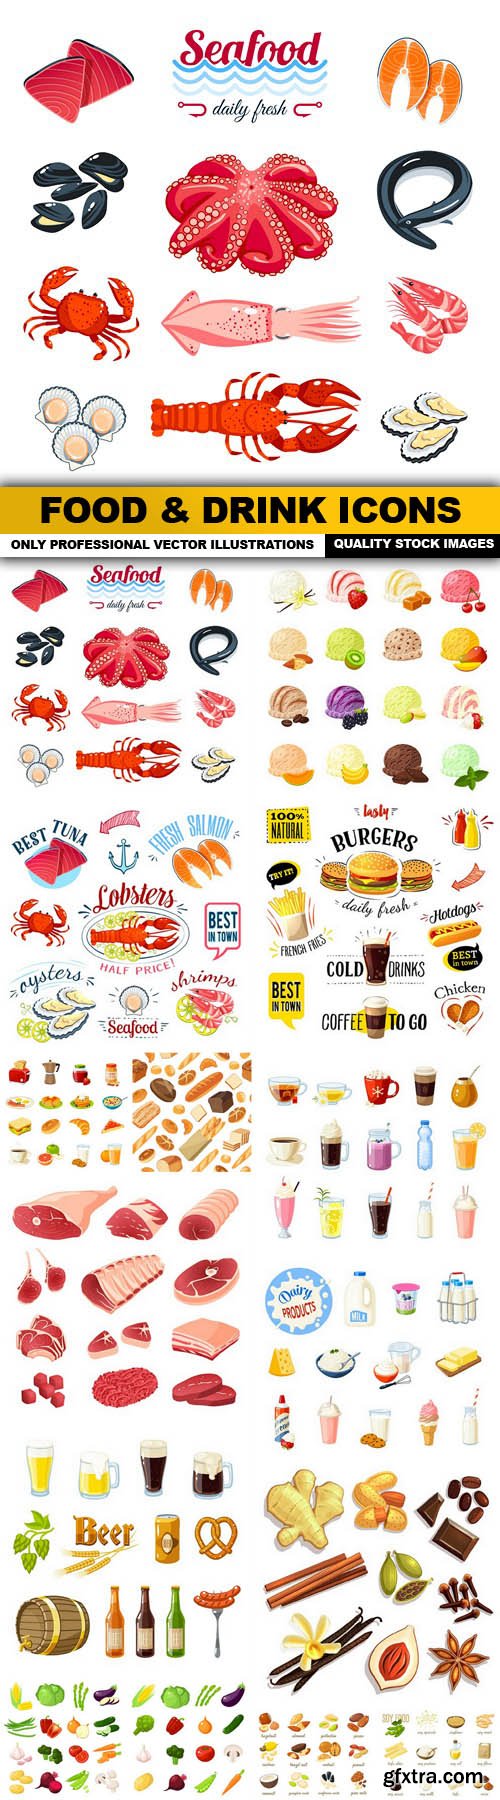 Food & Drink Icons - 15 Vector